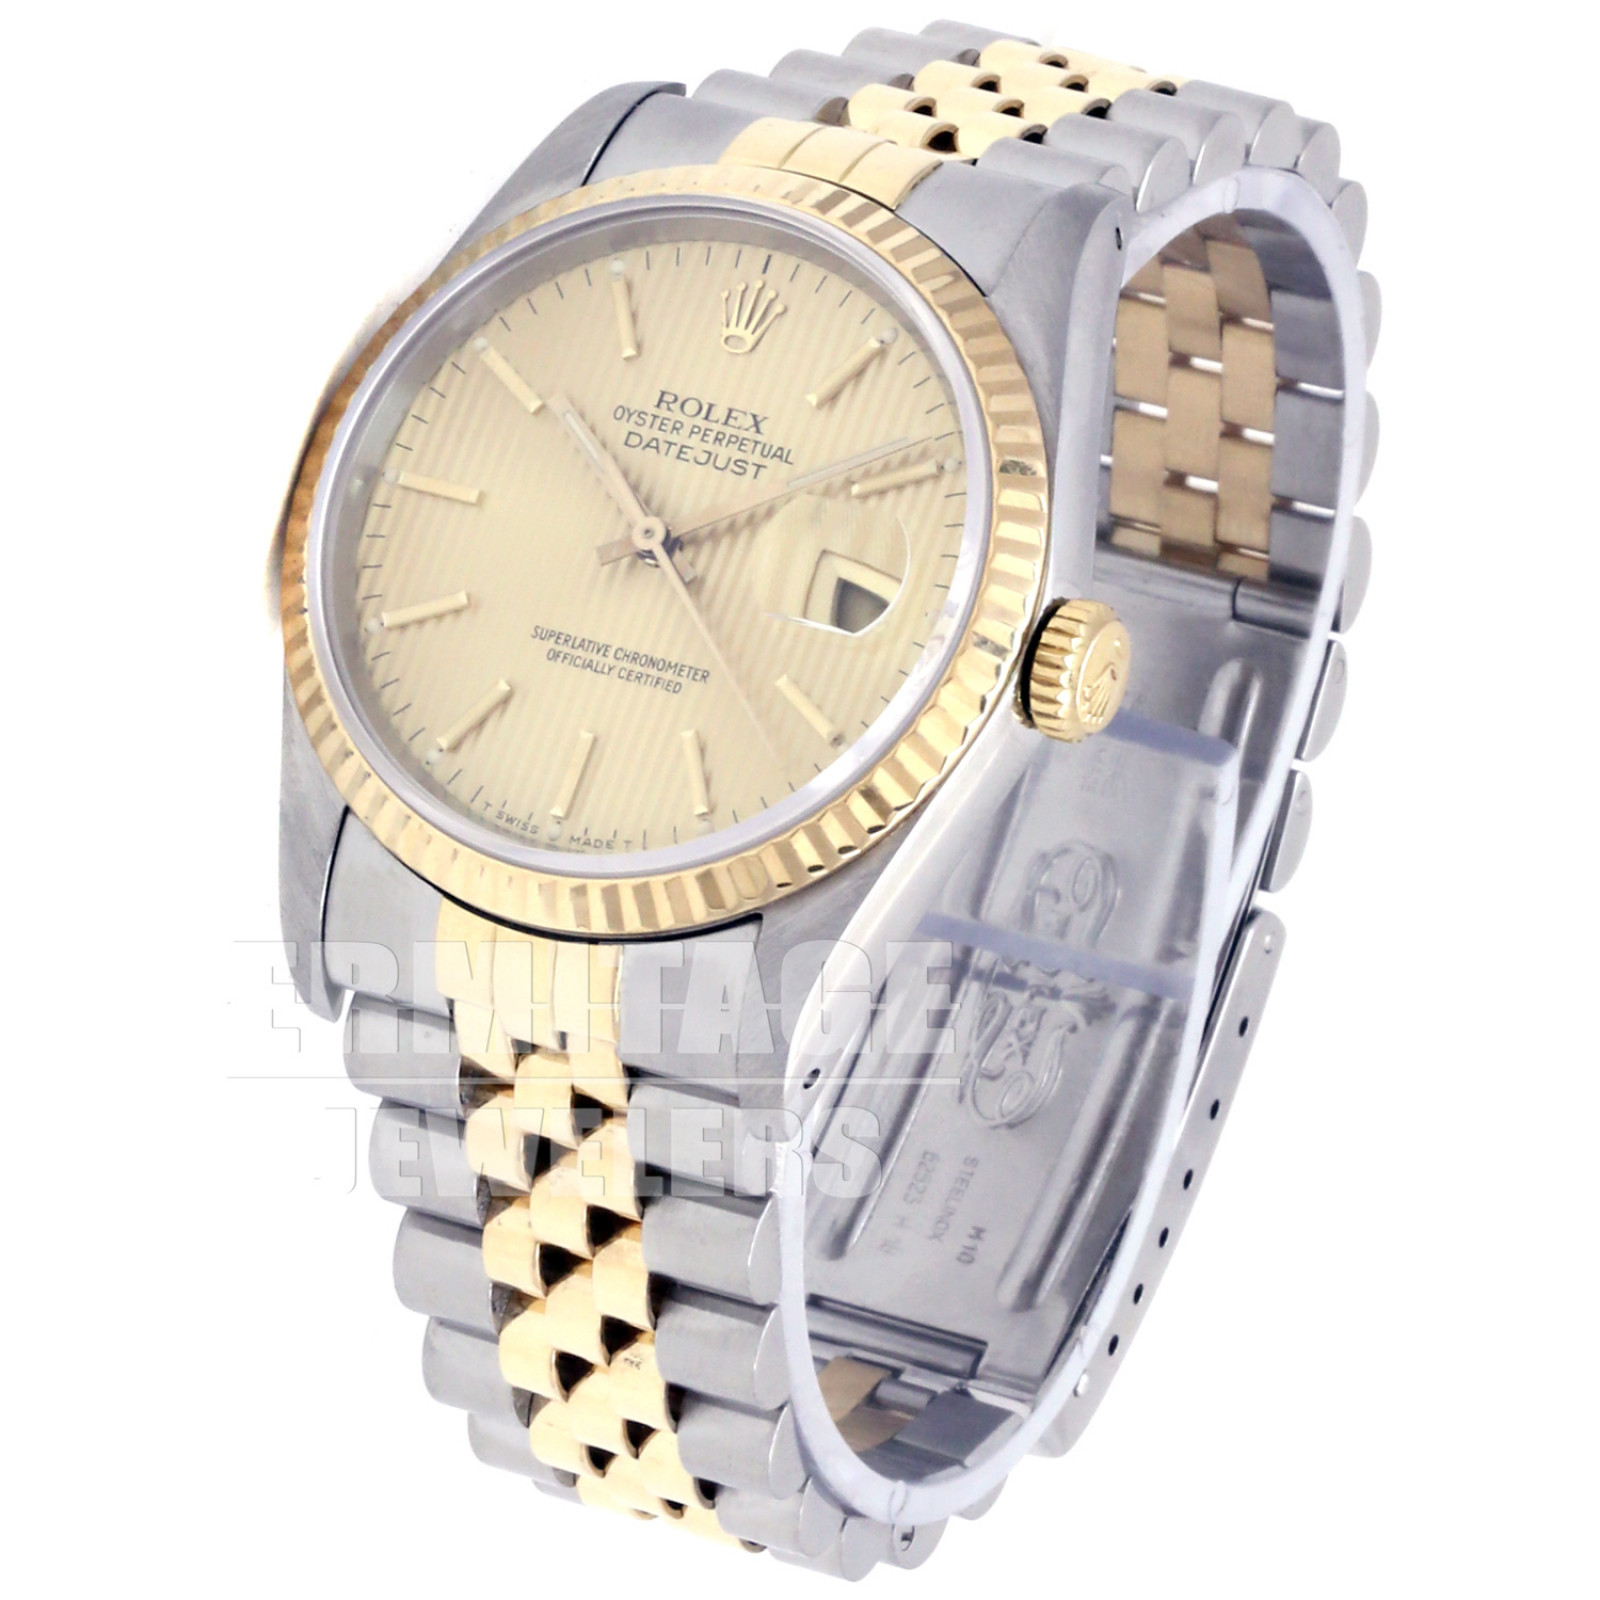 Rolex Datejust 16233 with Champagne Tapestry Dial